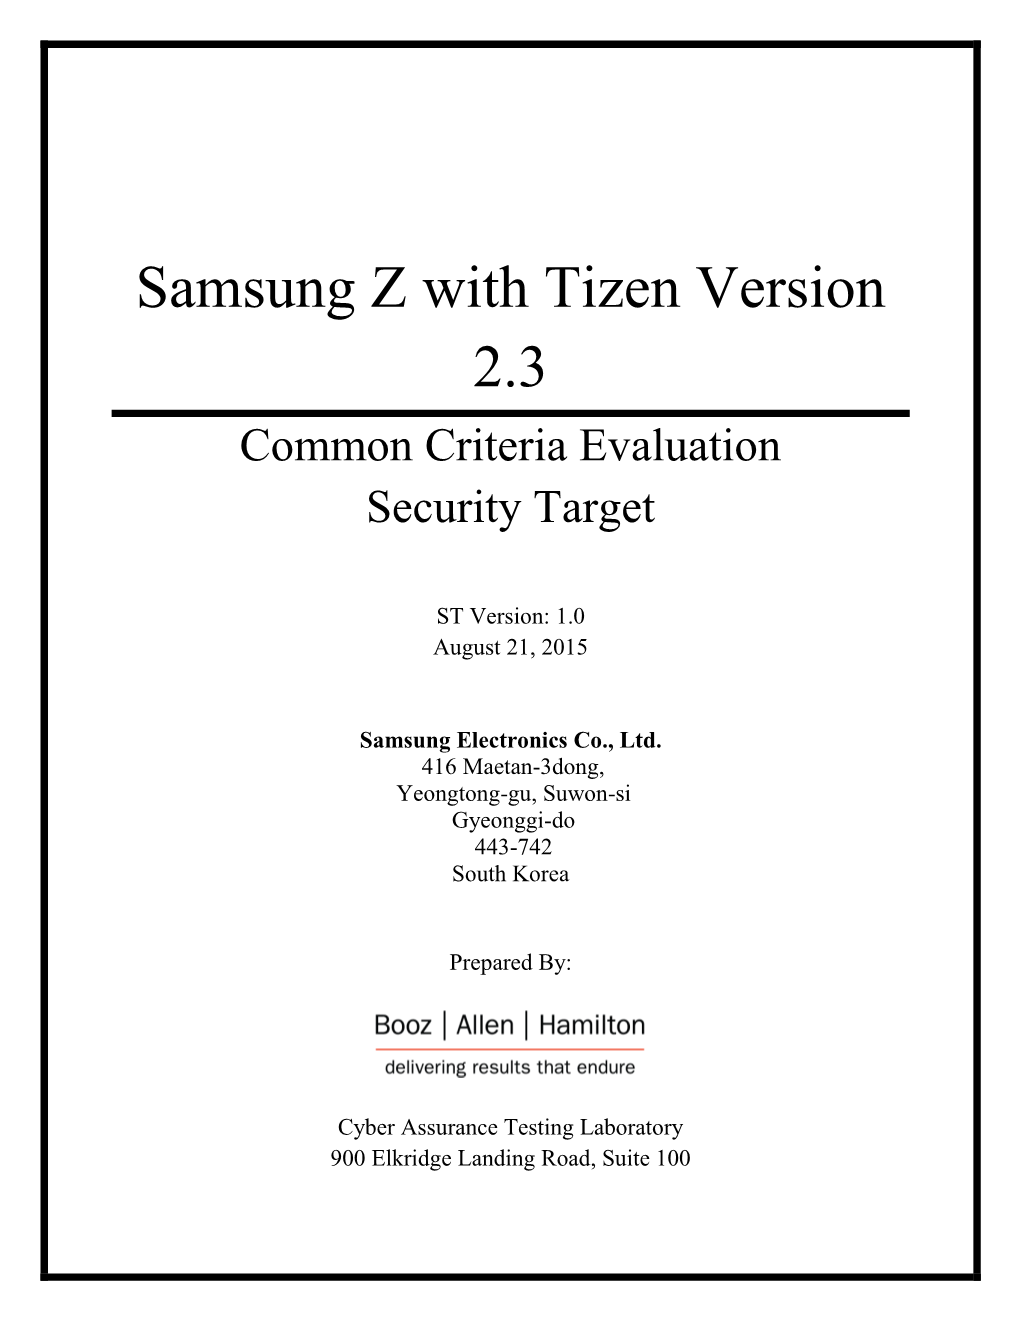 Samsung Z with Tizen Version 2.3 Common Criteria Evaluation Security Target